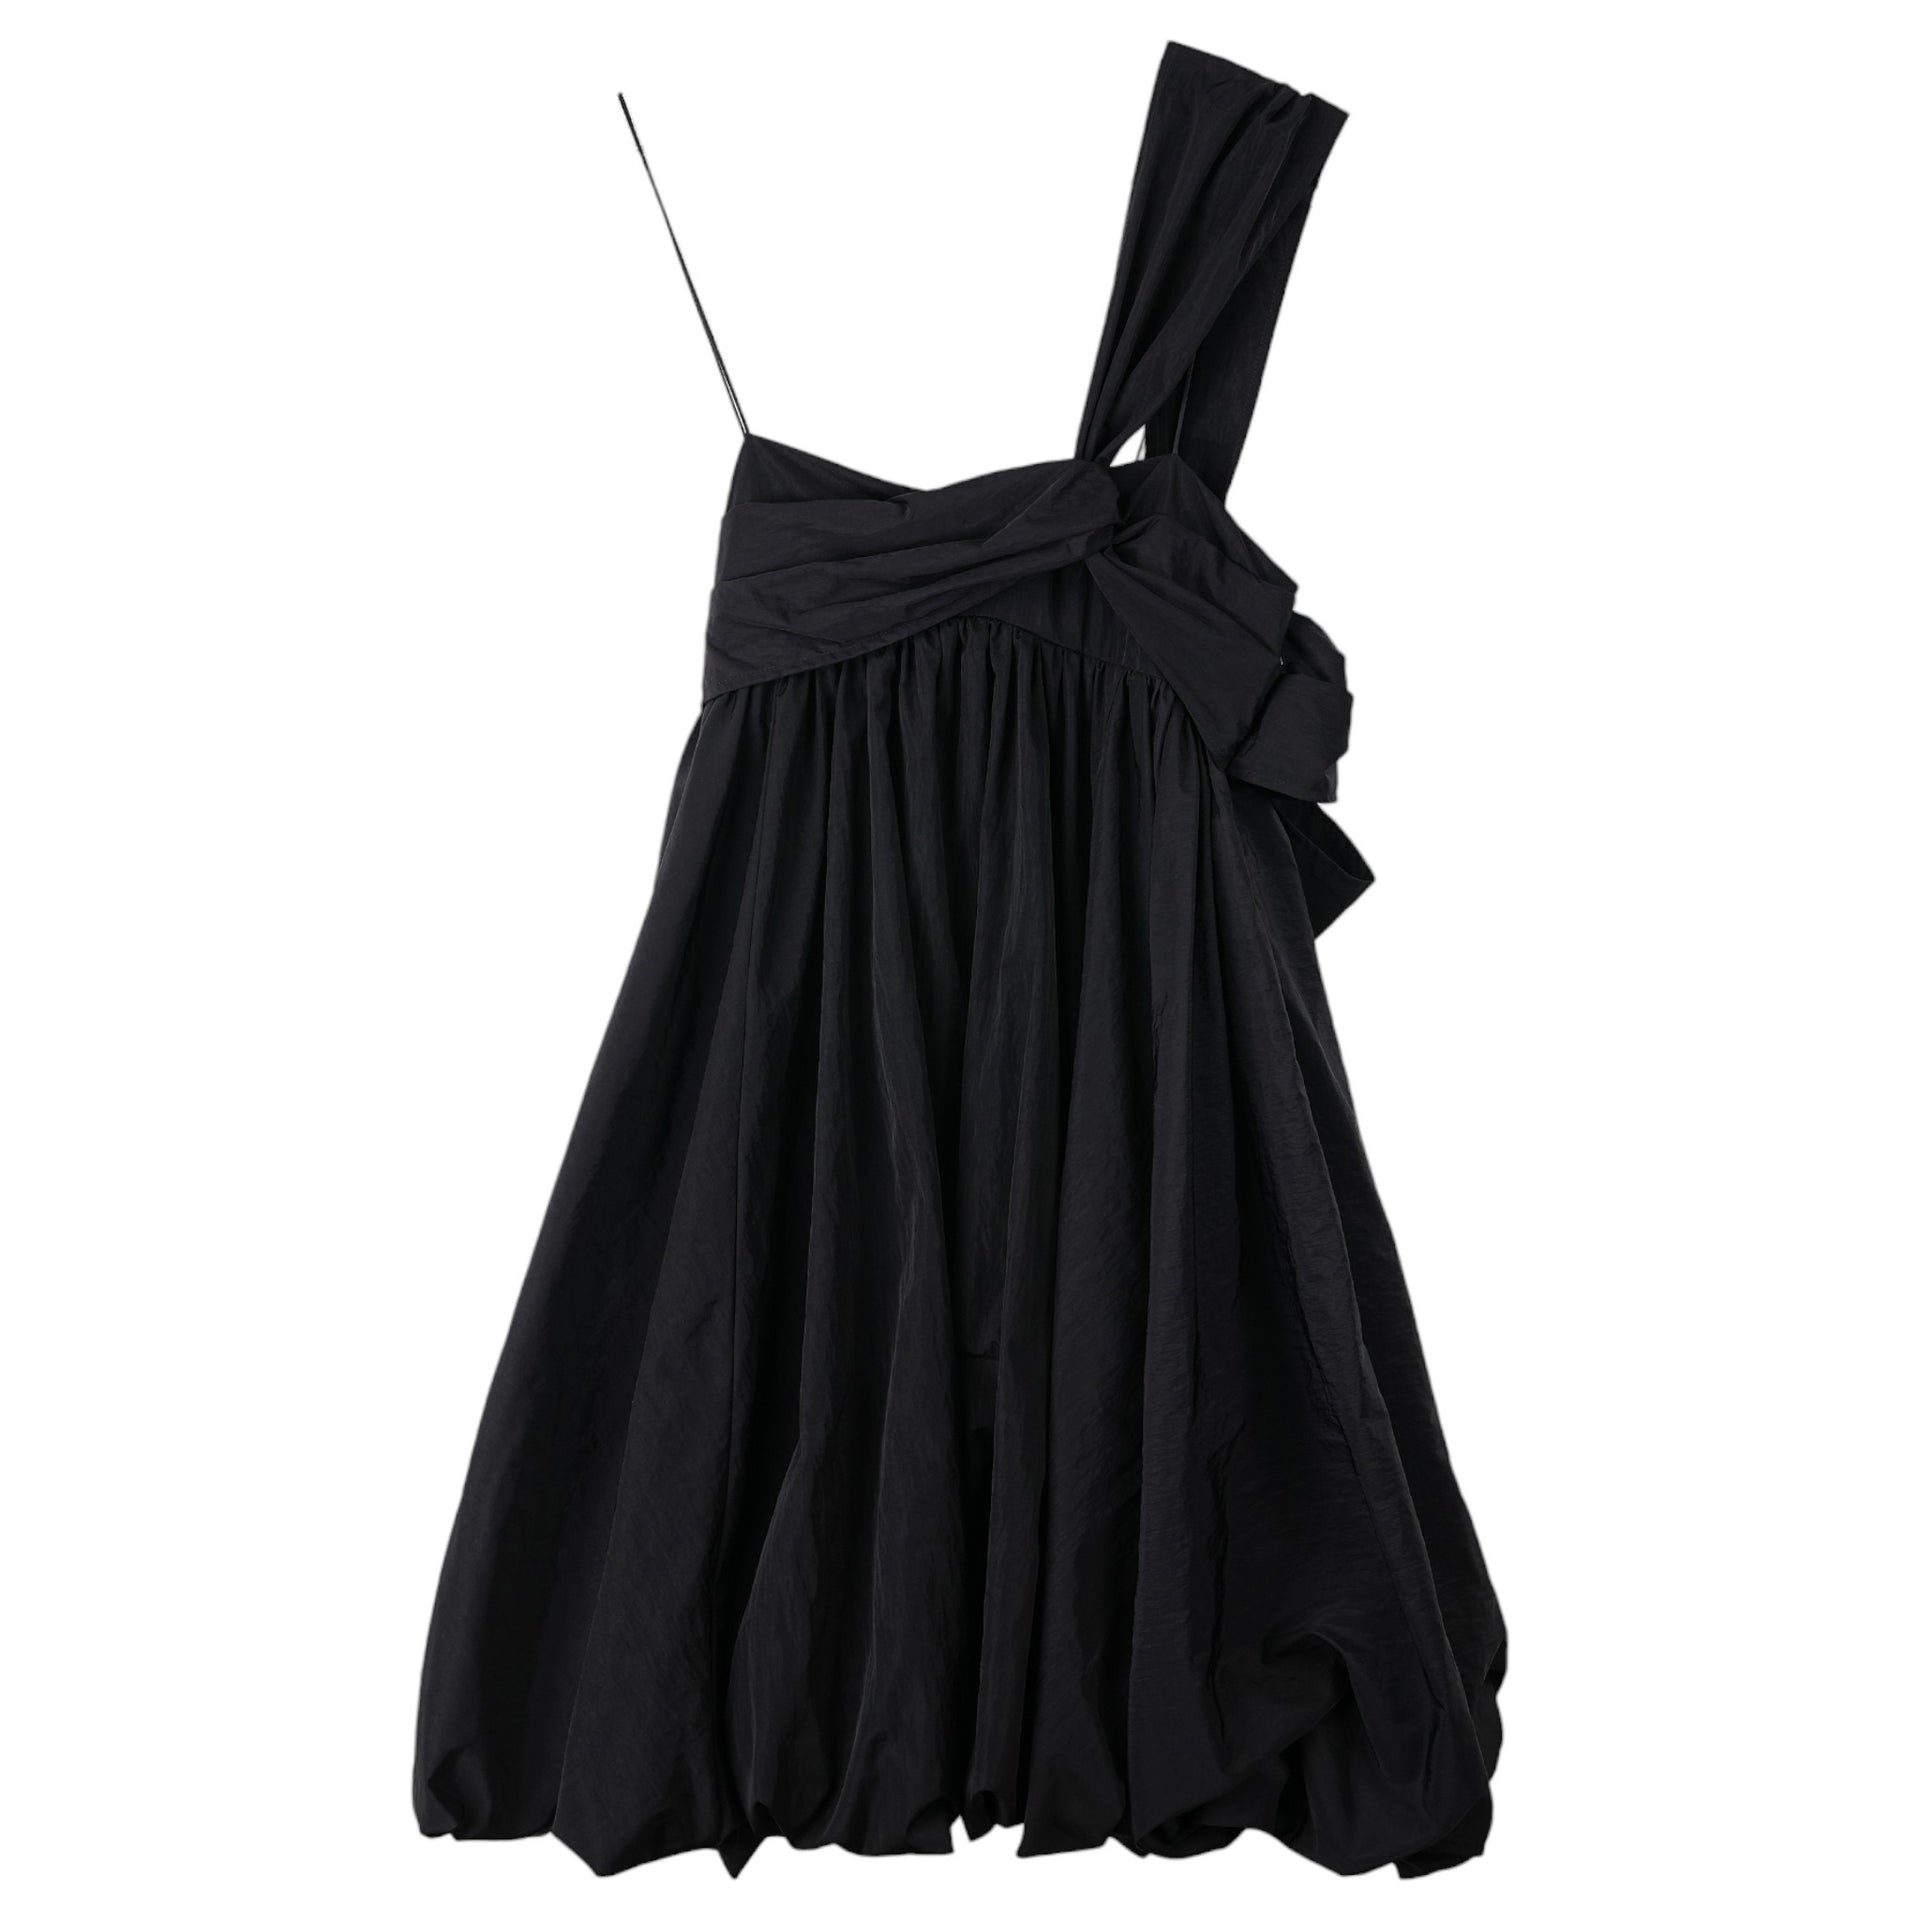 STRAP DRESS WITH TIE DETAILS AND BALLOON SKIRT / BLACK